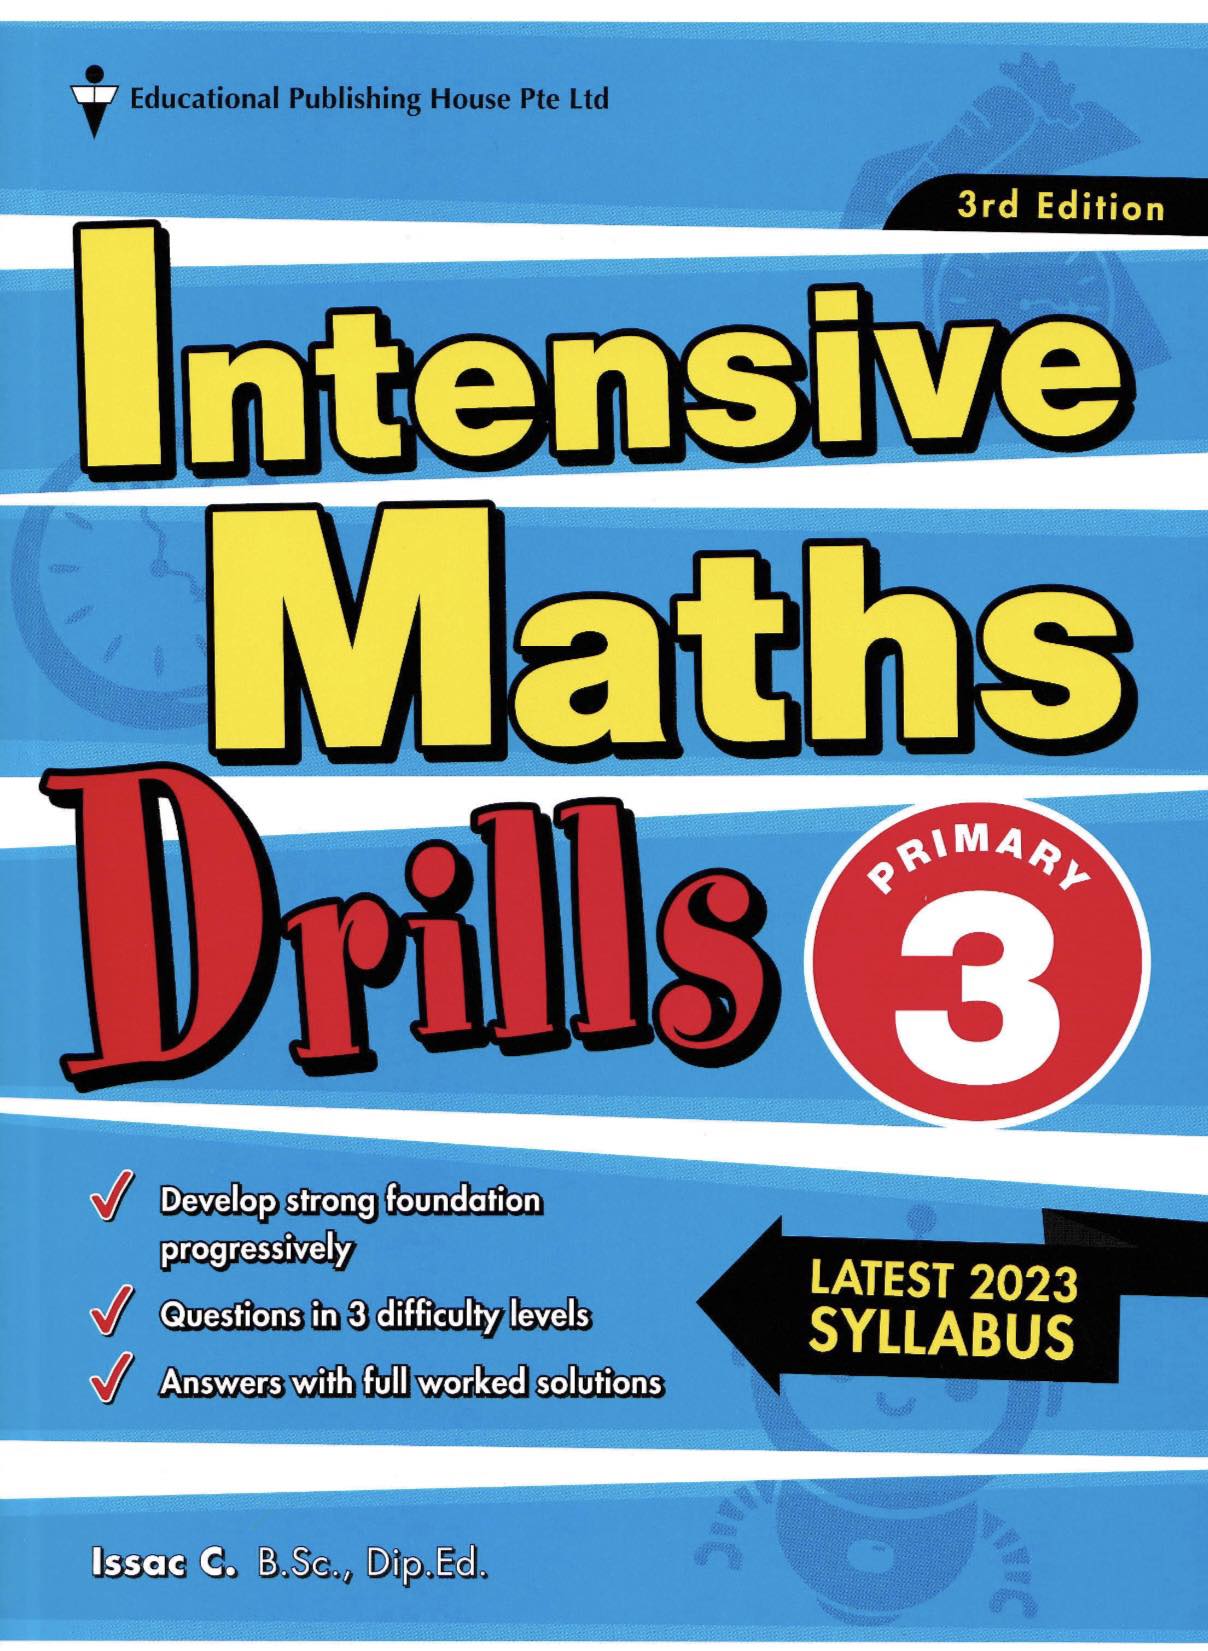 Intensive Maths Drills for Primary Levels